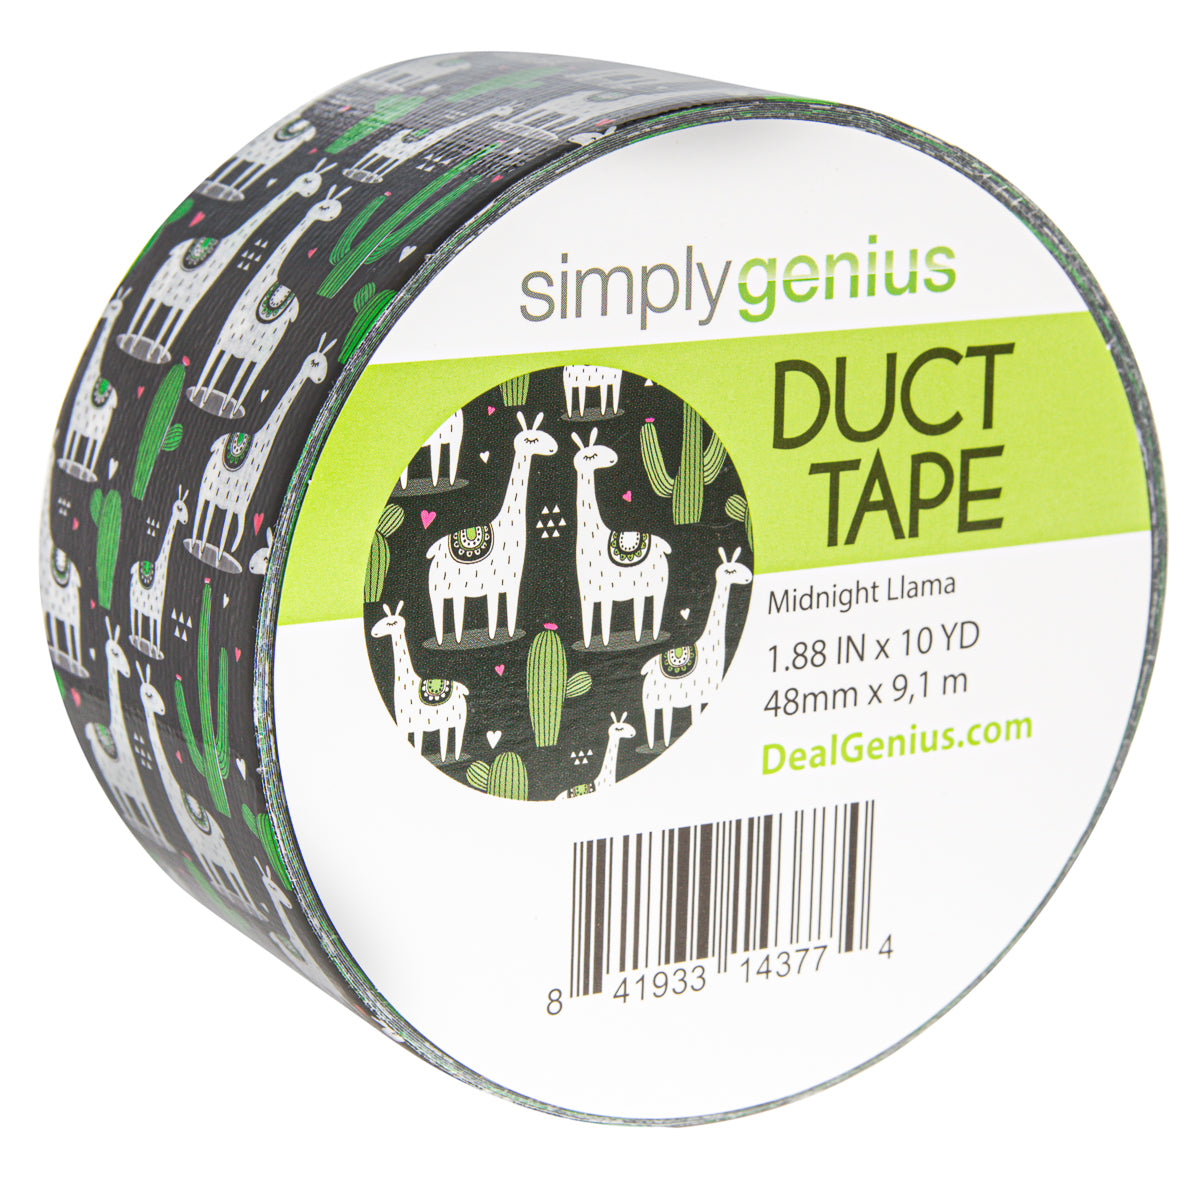  Duck Brand Duck Printed Duct Tape, 6-Roll, Llama